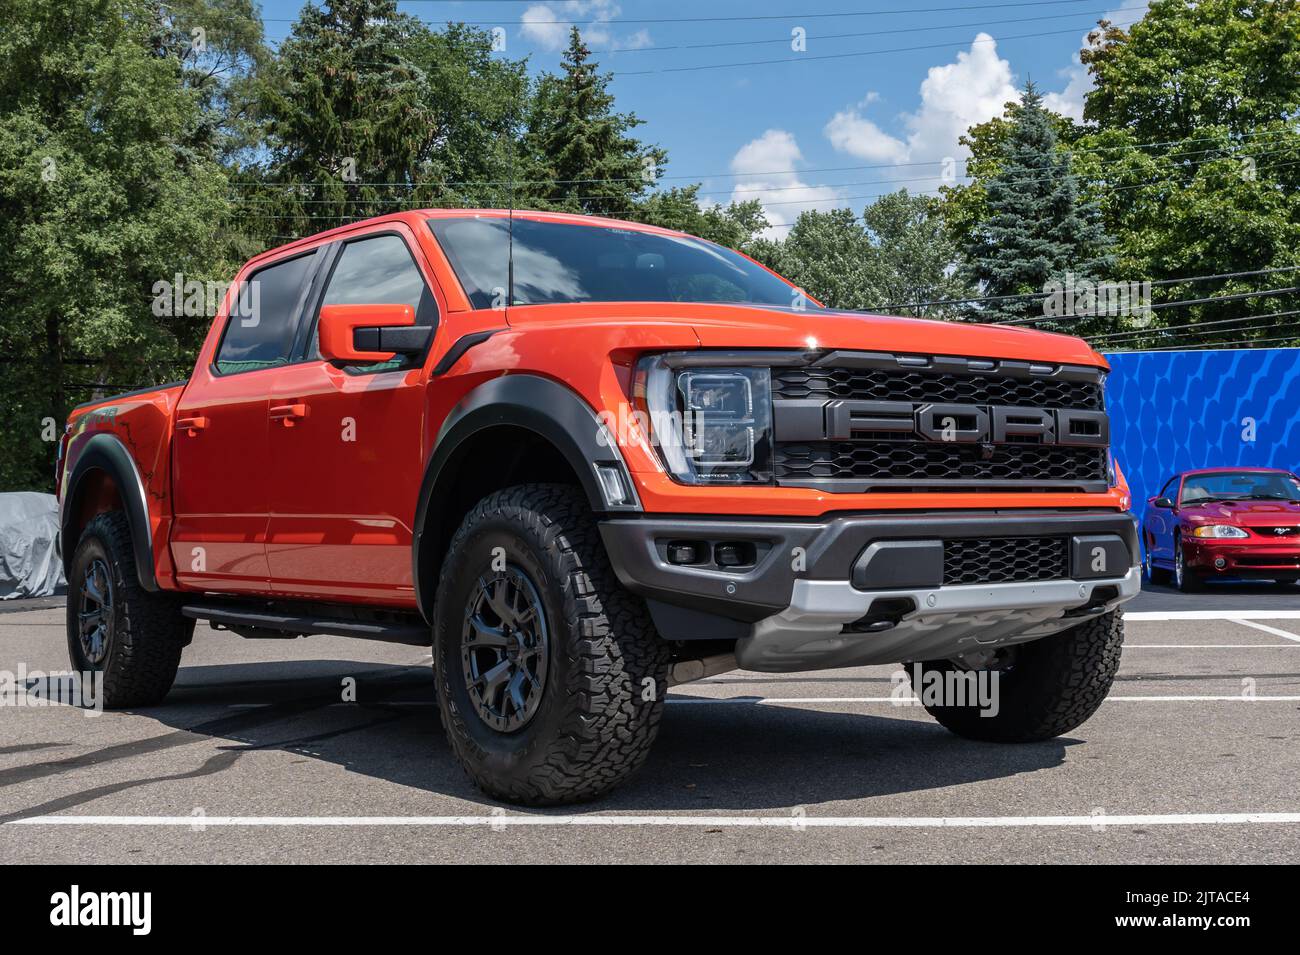 ROYAL OAK, MI/USA - AUGUST 19, 2022: A 2022 Ford F-150 Raptor truck at the Ford exhibit on the Woodward Dream Cruise route. Stock Photo